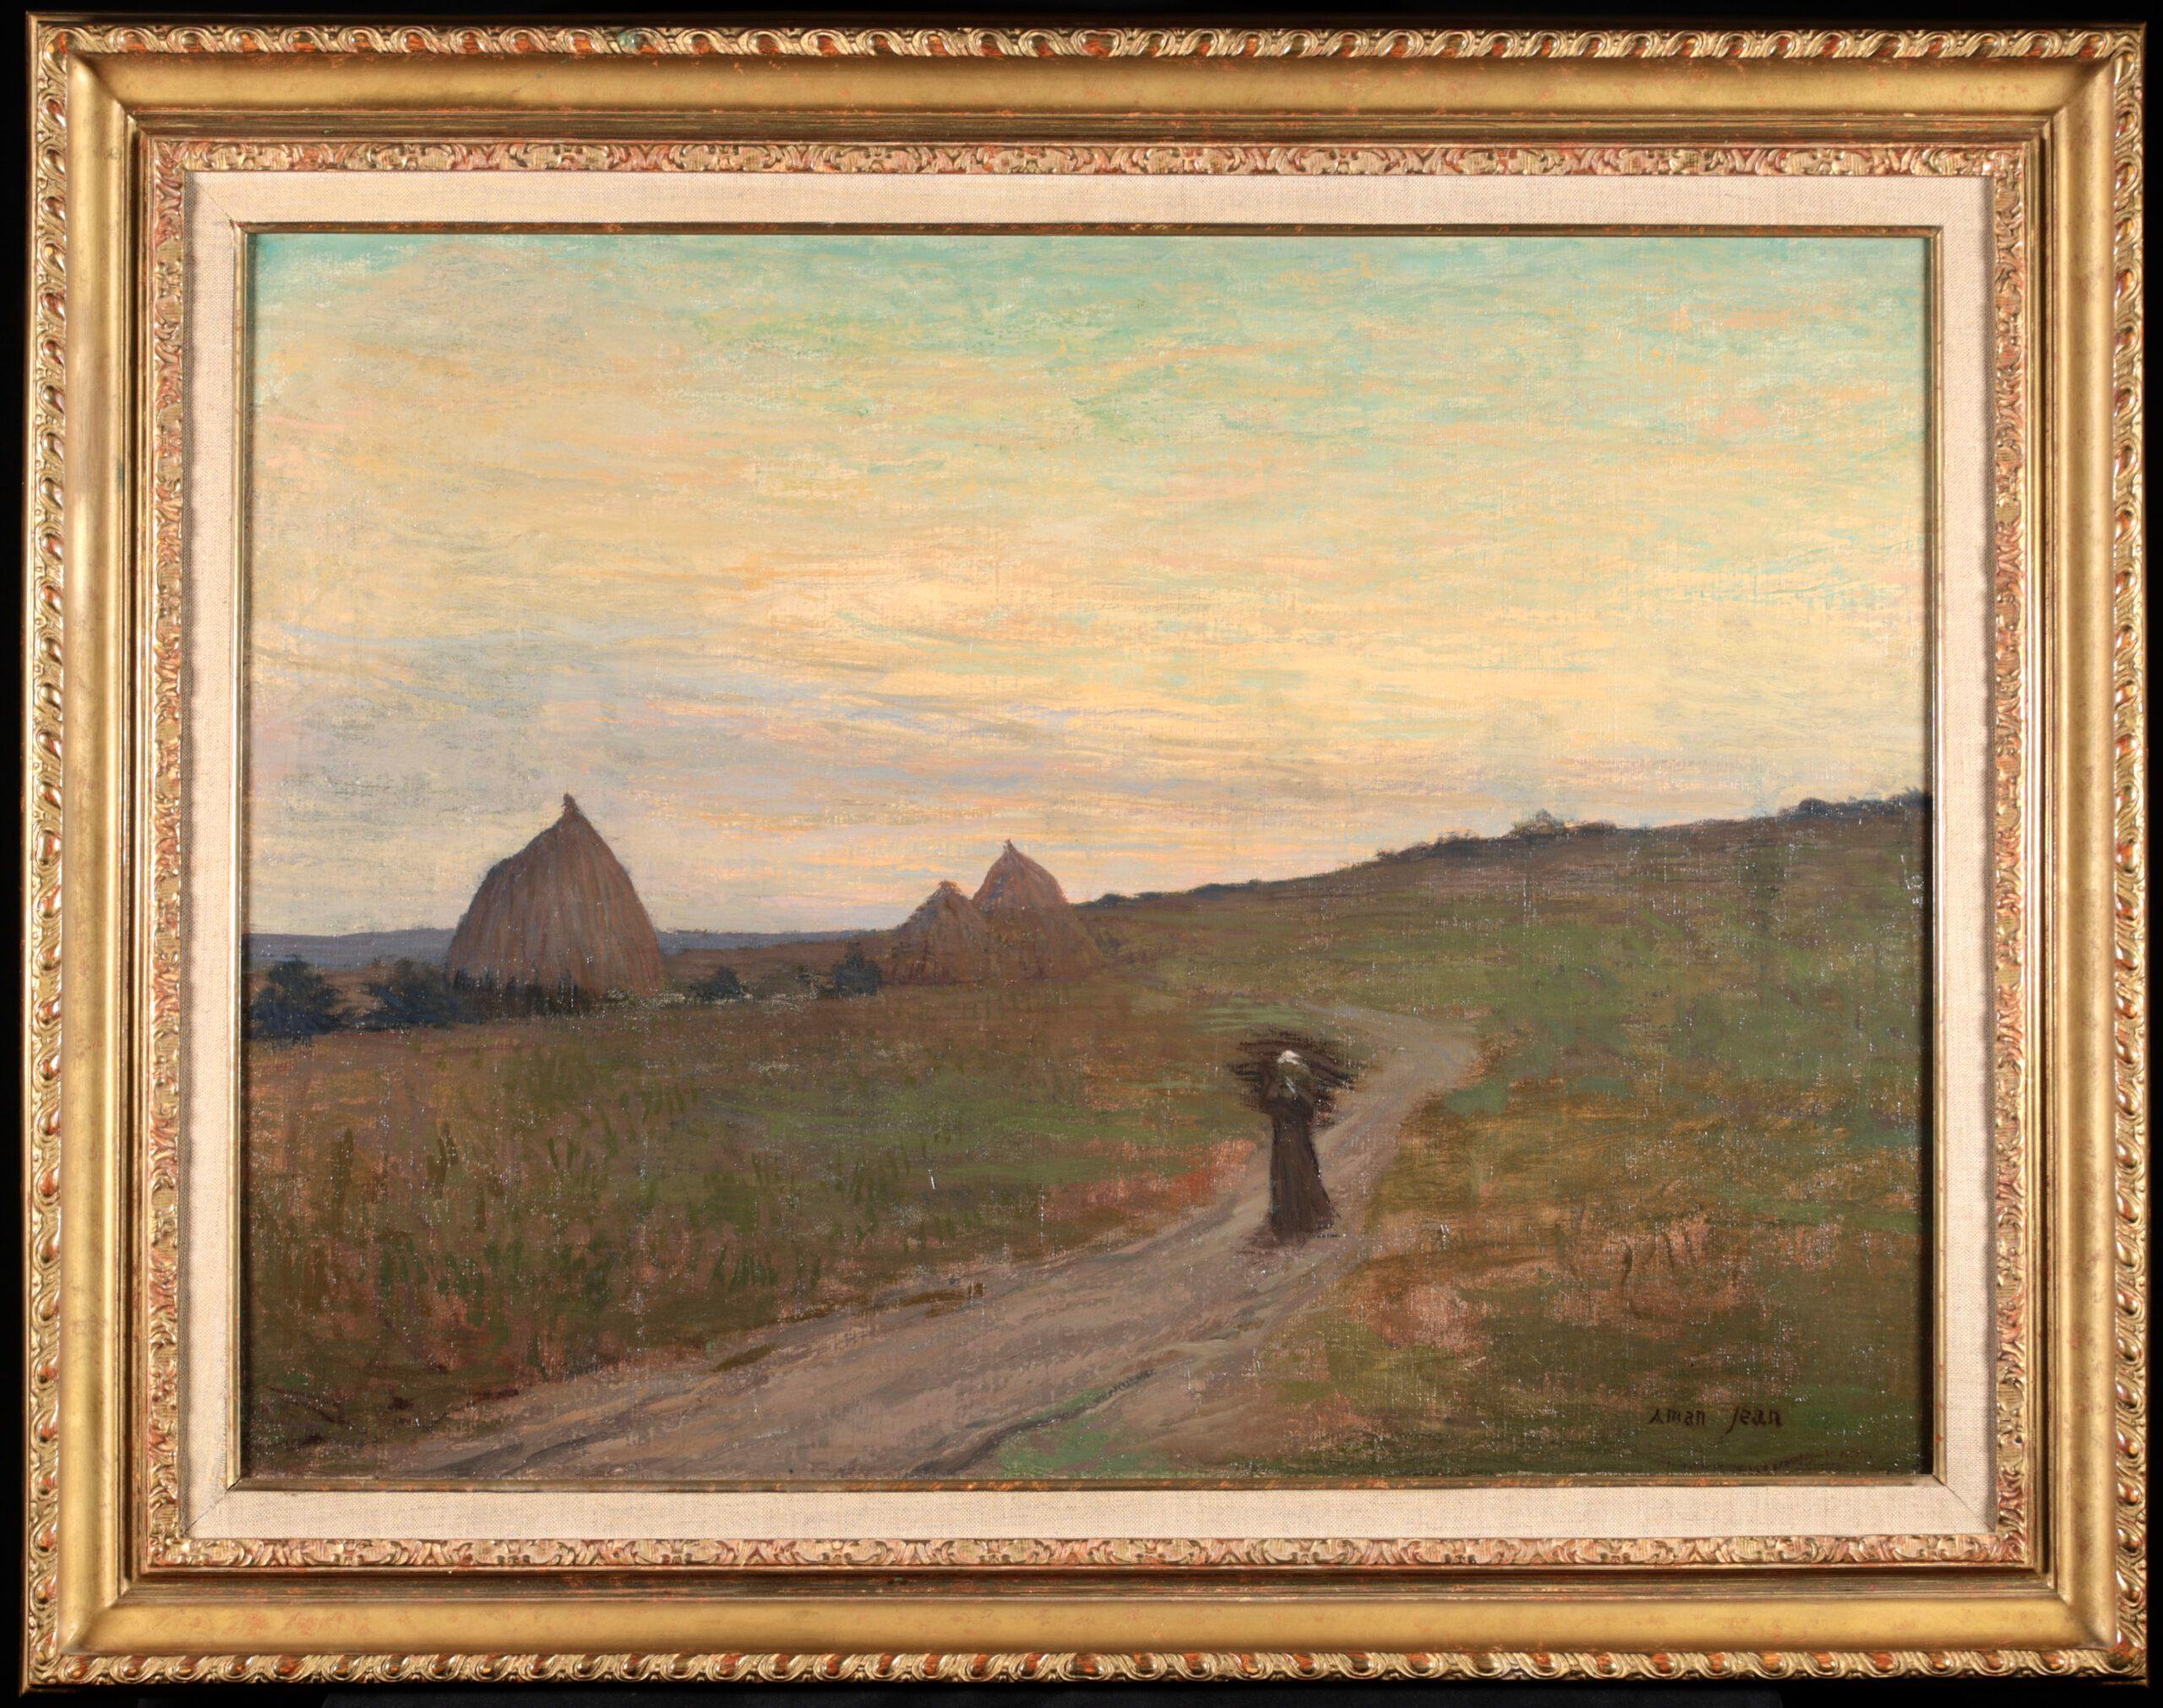 Signed symbolist figure in landscape oil on original canvas circa 1890 by French painter Edmond Francois Aman-Jean. The work depicts a lone woman carrying a load on a rural path. In the distance the sun is setting in the most beautiful shades on